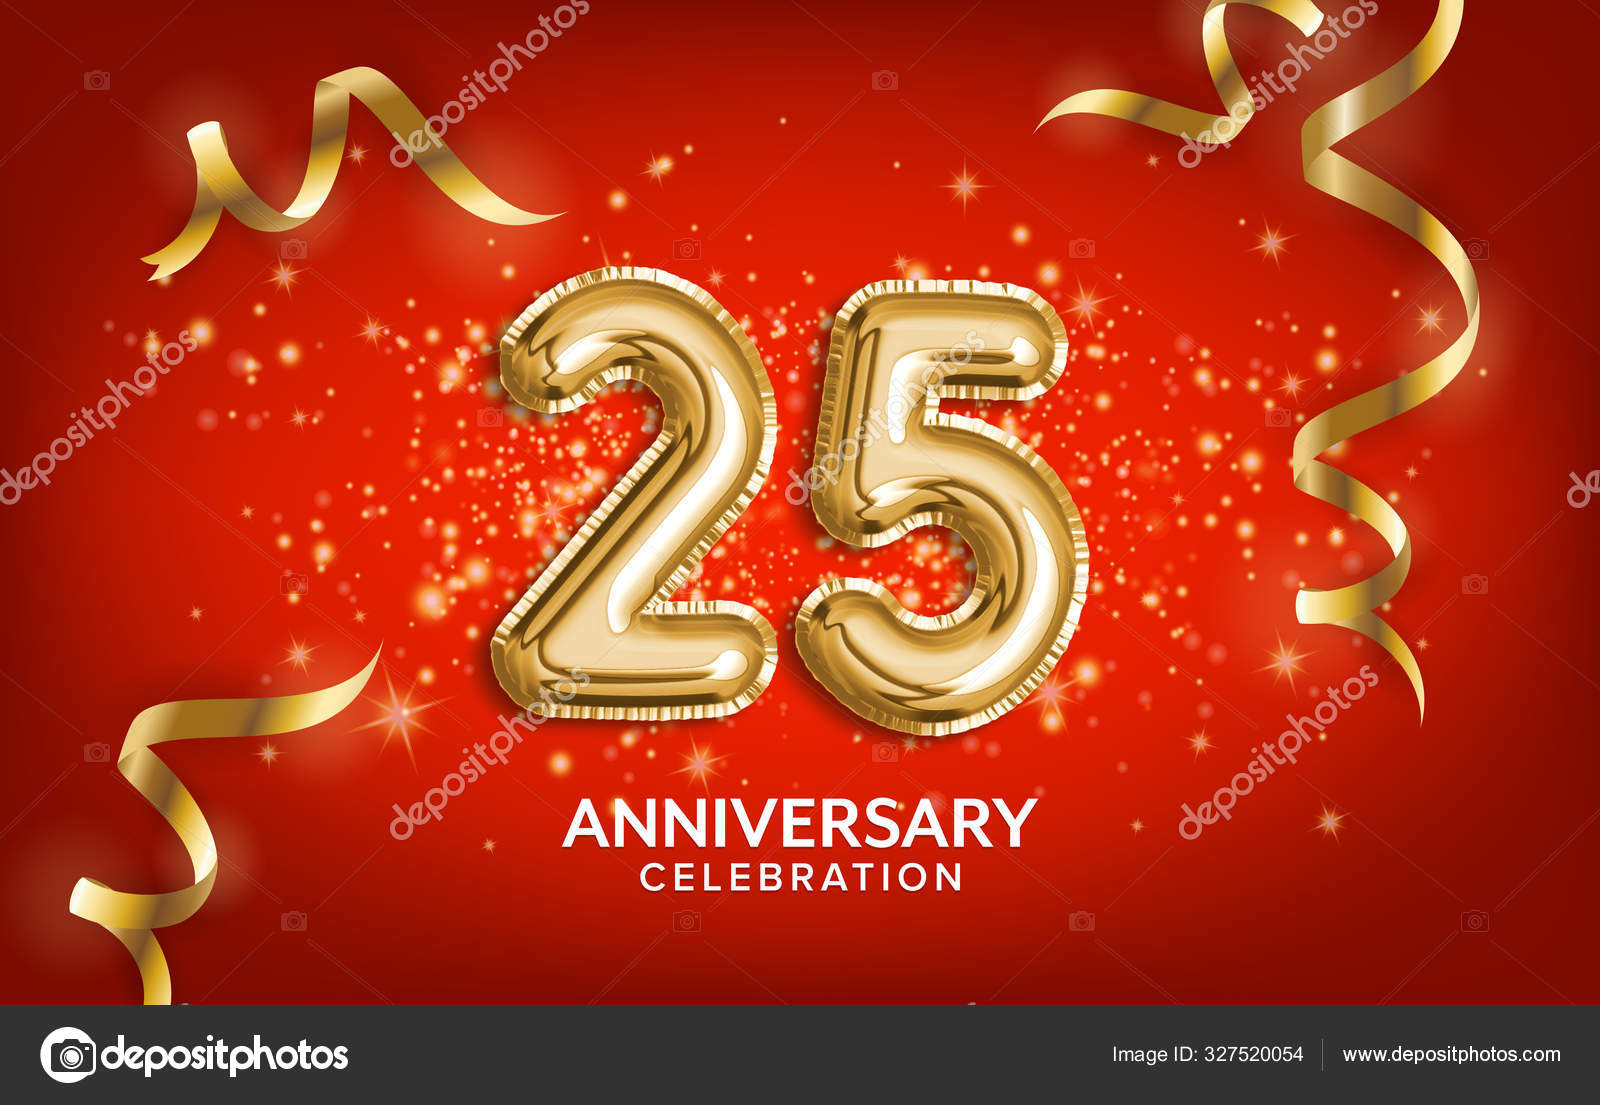 25th anniversary background Stock Photos, Royalty Free 25th anniversary  background Images | Depositphotos